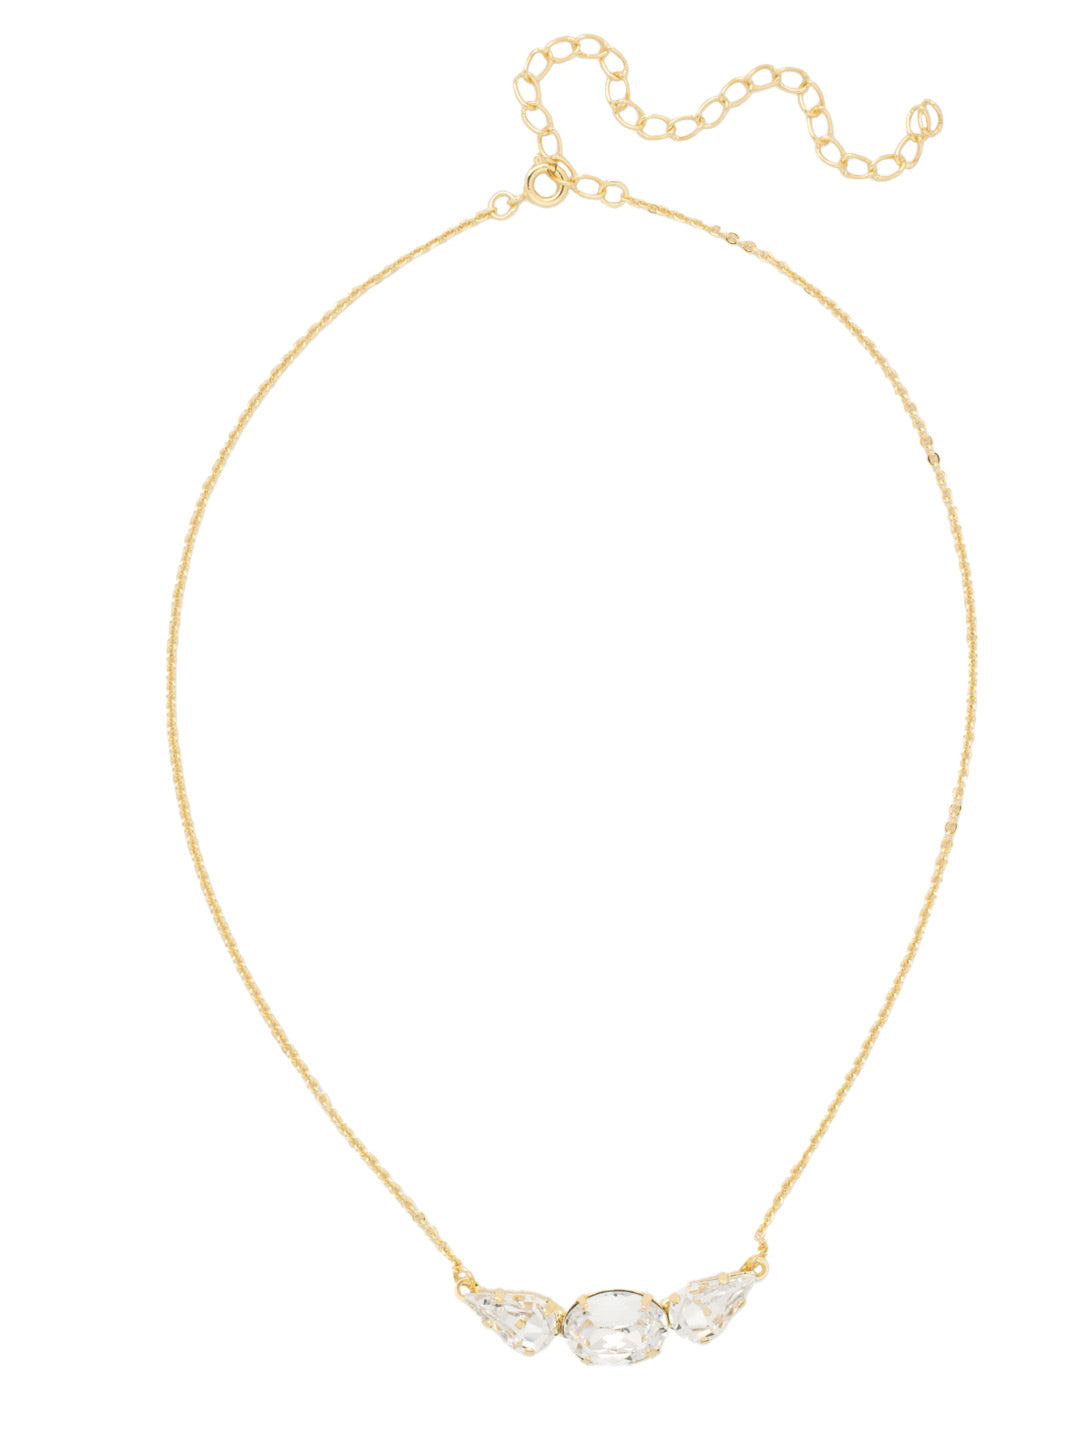 Oval and Pear Tennis Necklace - NFL14BGCRY